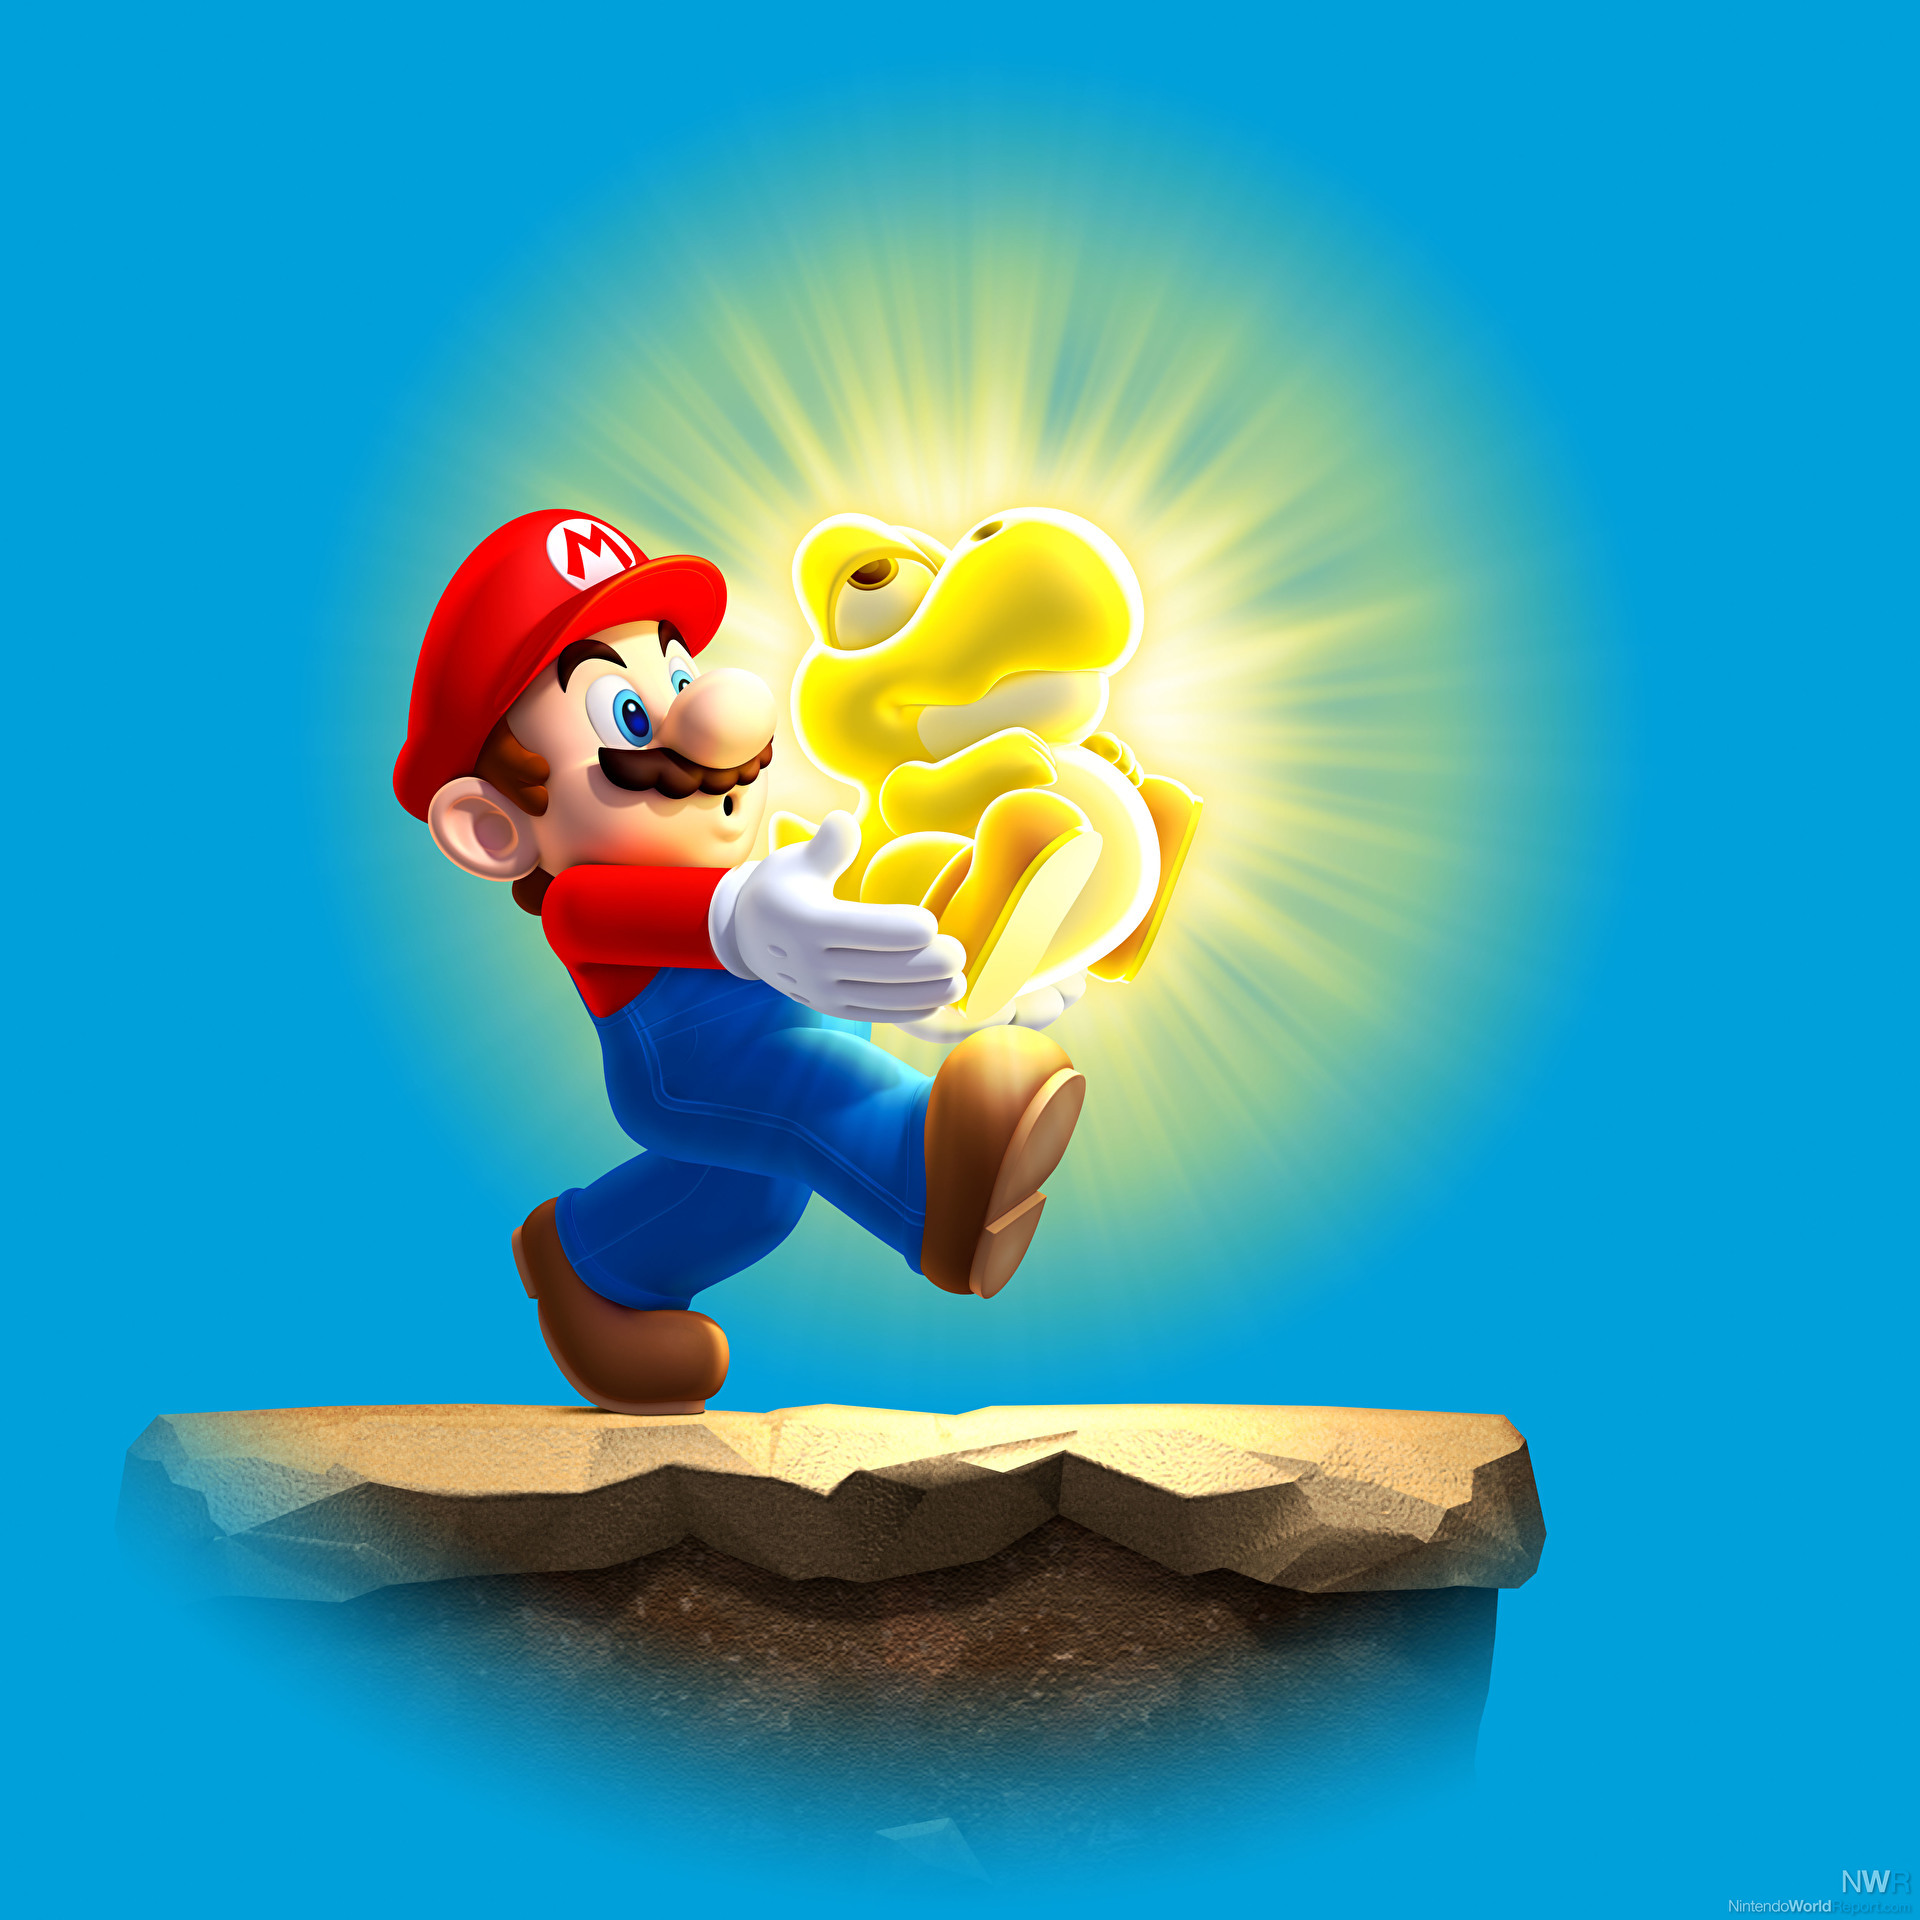 can you play the old super mario bros on wii u